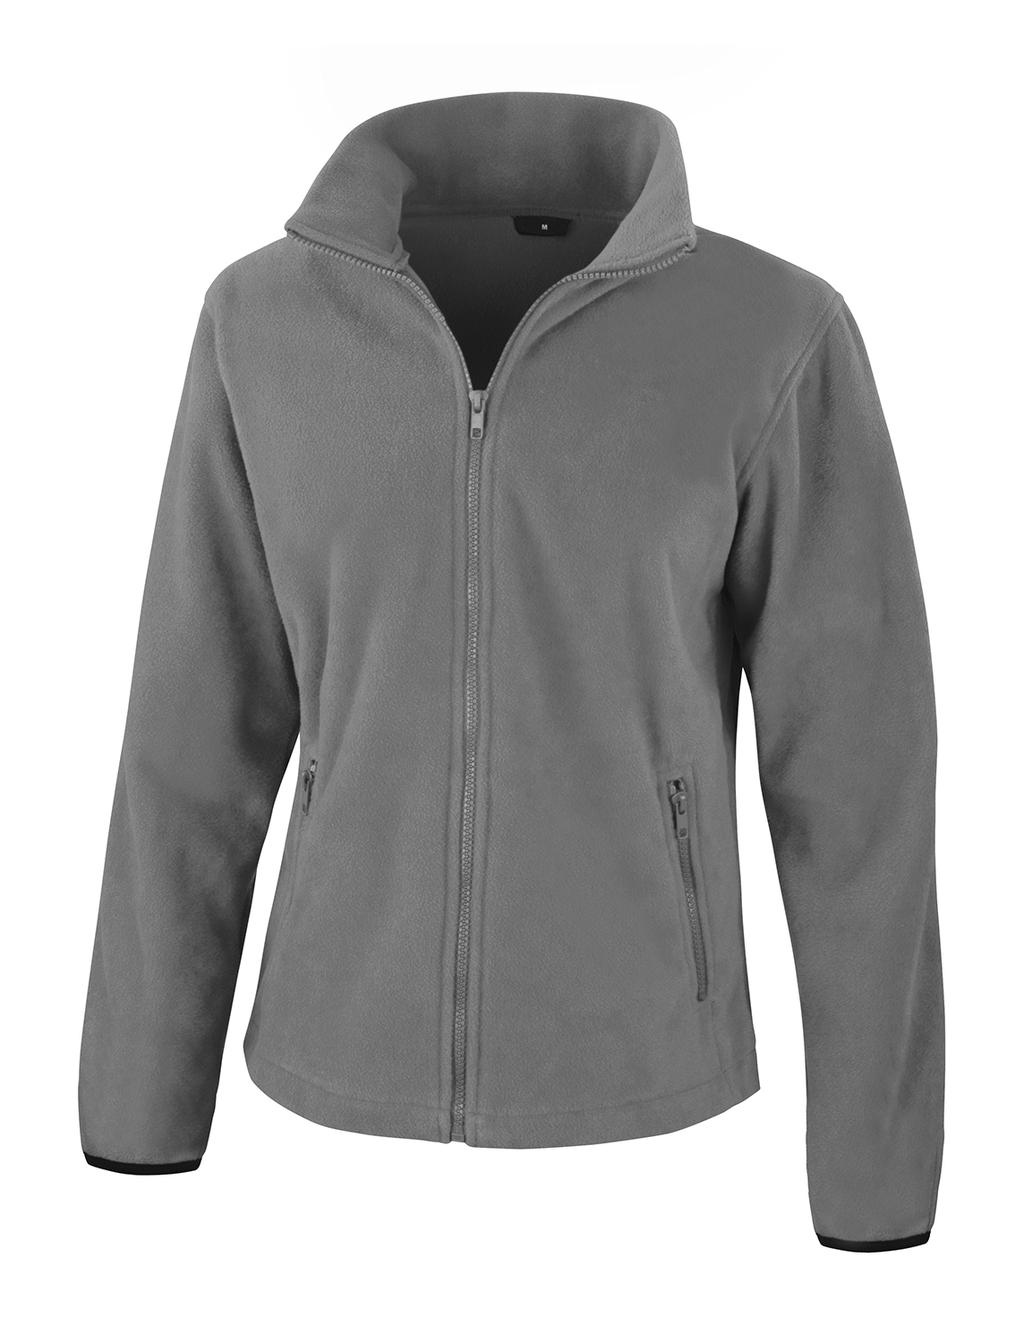  Womens Fashion Fit Outdoor Fleece in Farbe Pure Grey